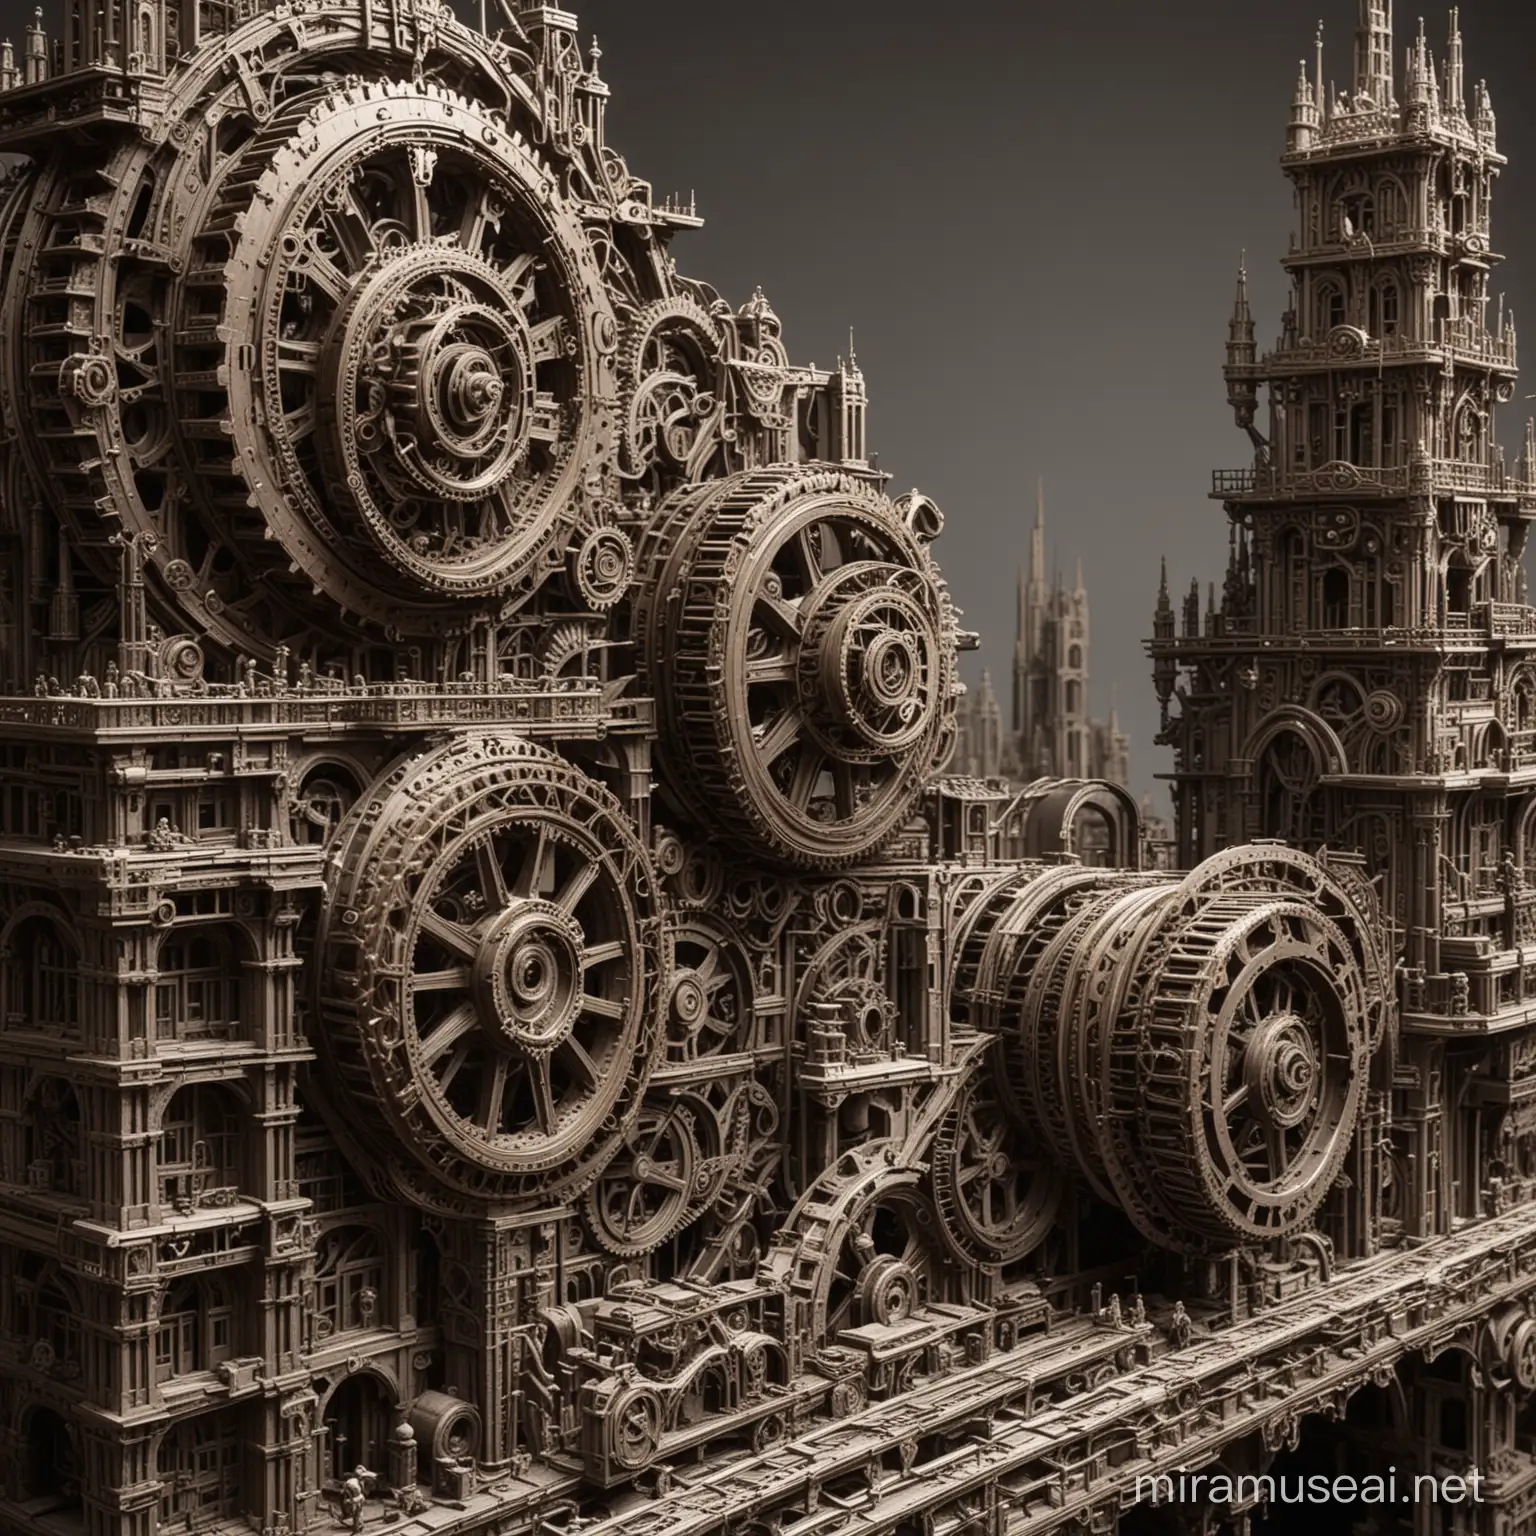 A cityscape where buildings are made of intricate gears and machinery, blending architecture with mechanics.